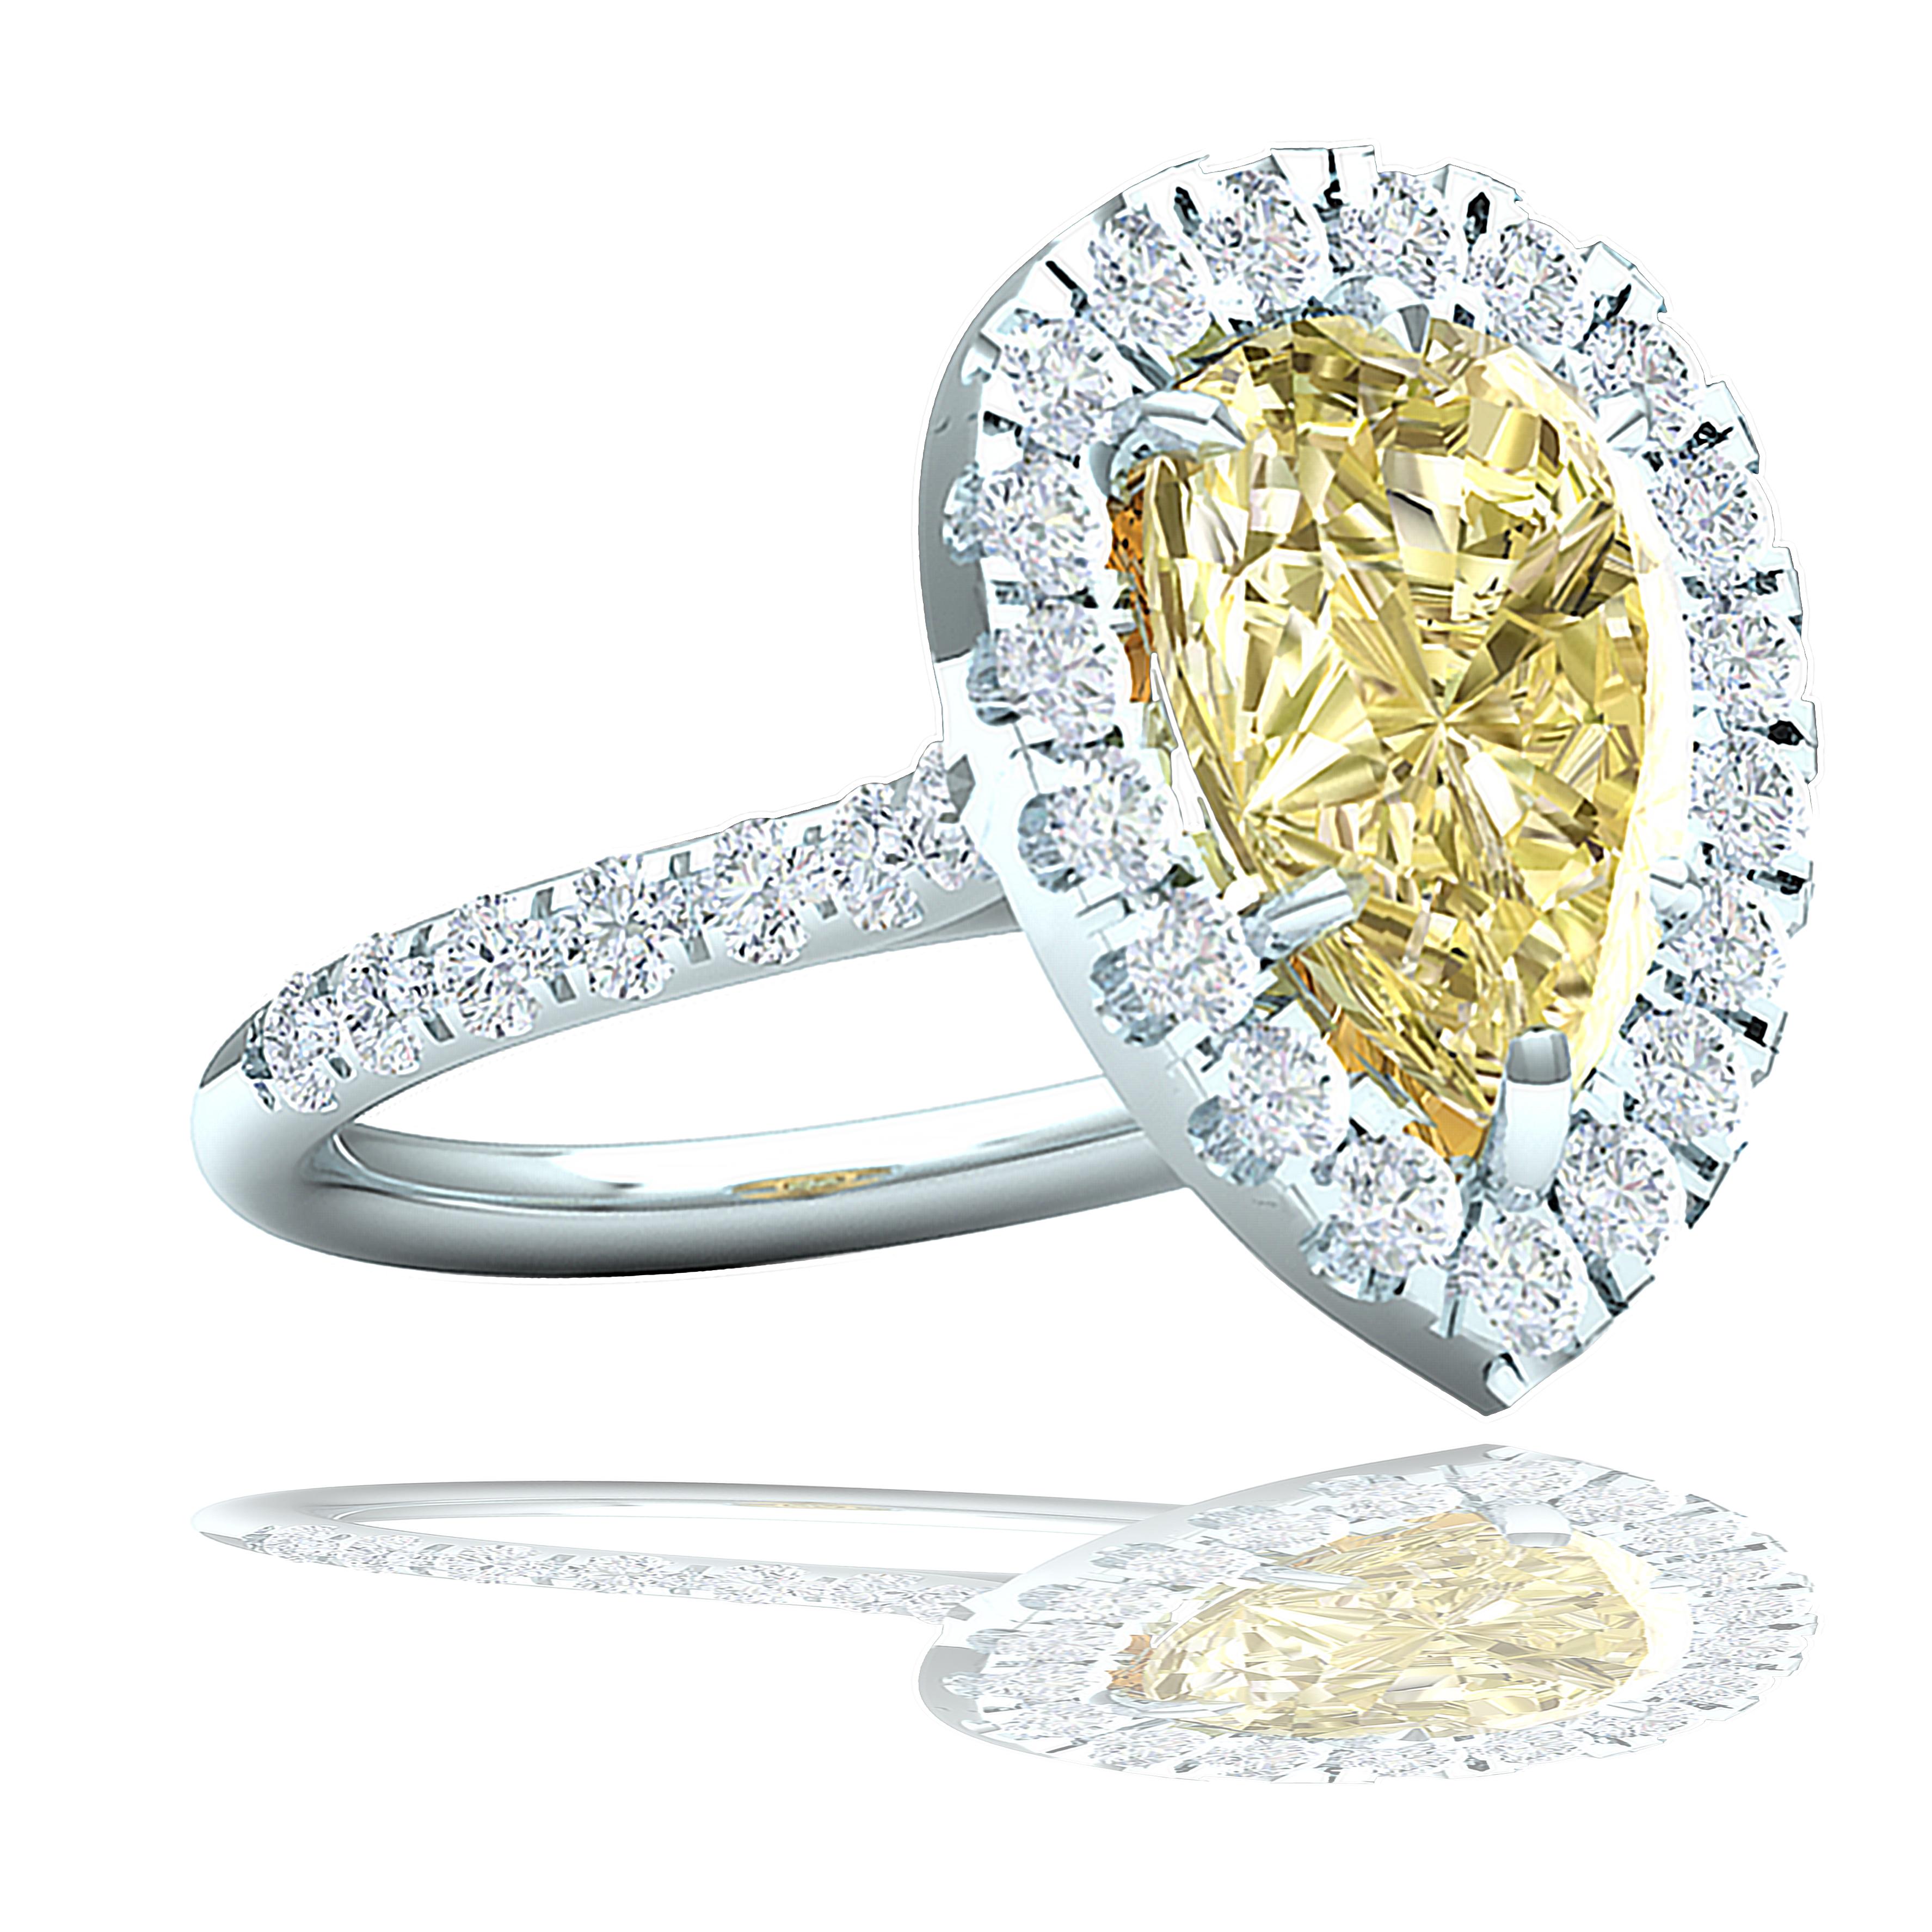 A beautiful 2 carat Pear shape diamond is centered in this ring.  The center is a uncertified 2 carat pear shape which is light in yellow color but now after setting has a rich yellow hue.  I believe the center diamond would be a color in the R-V